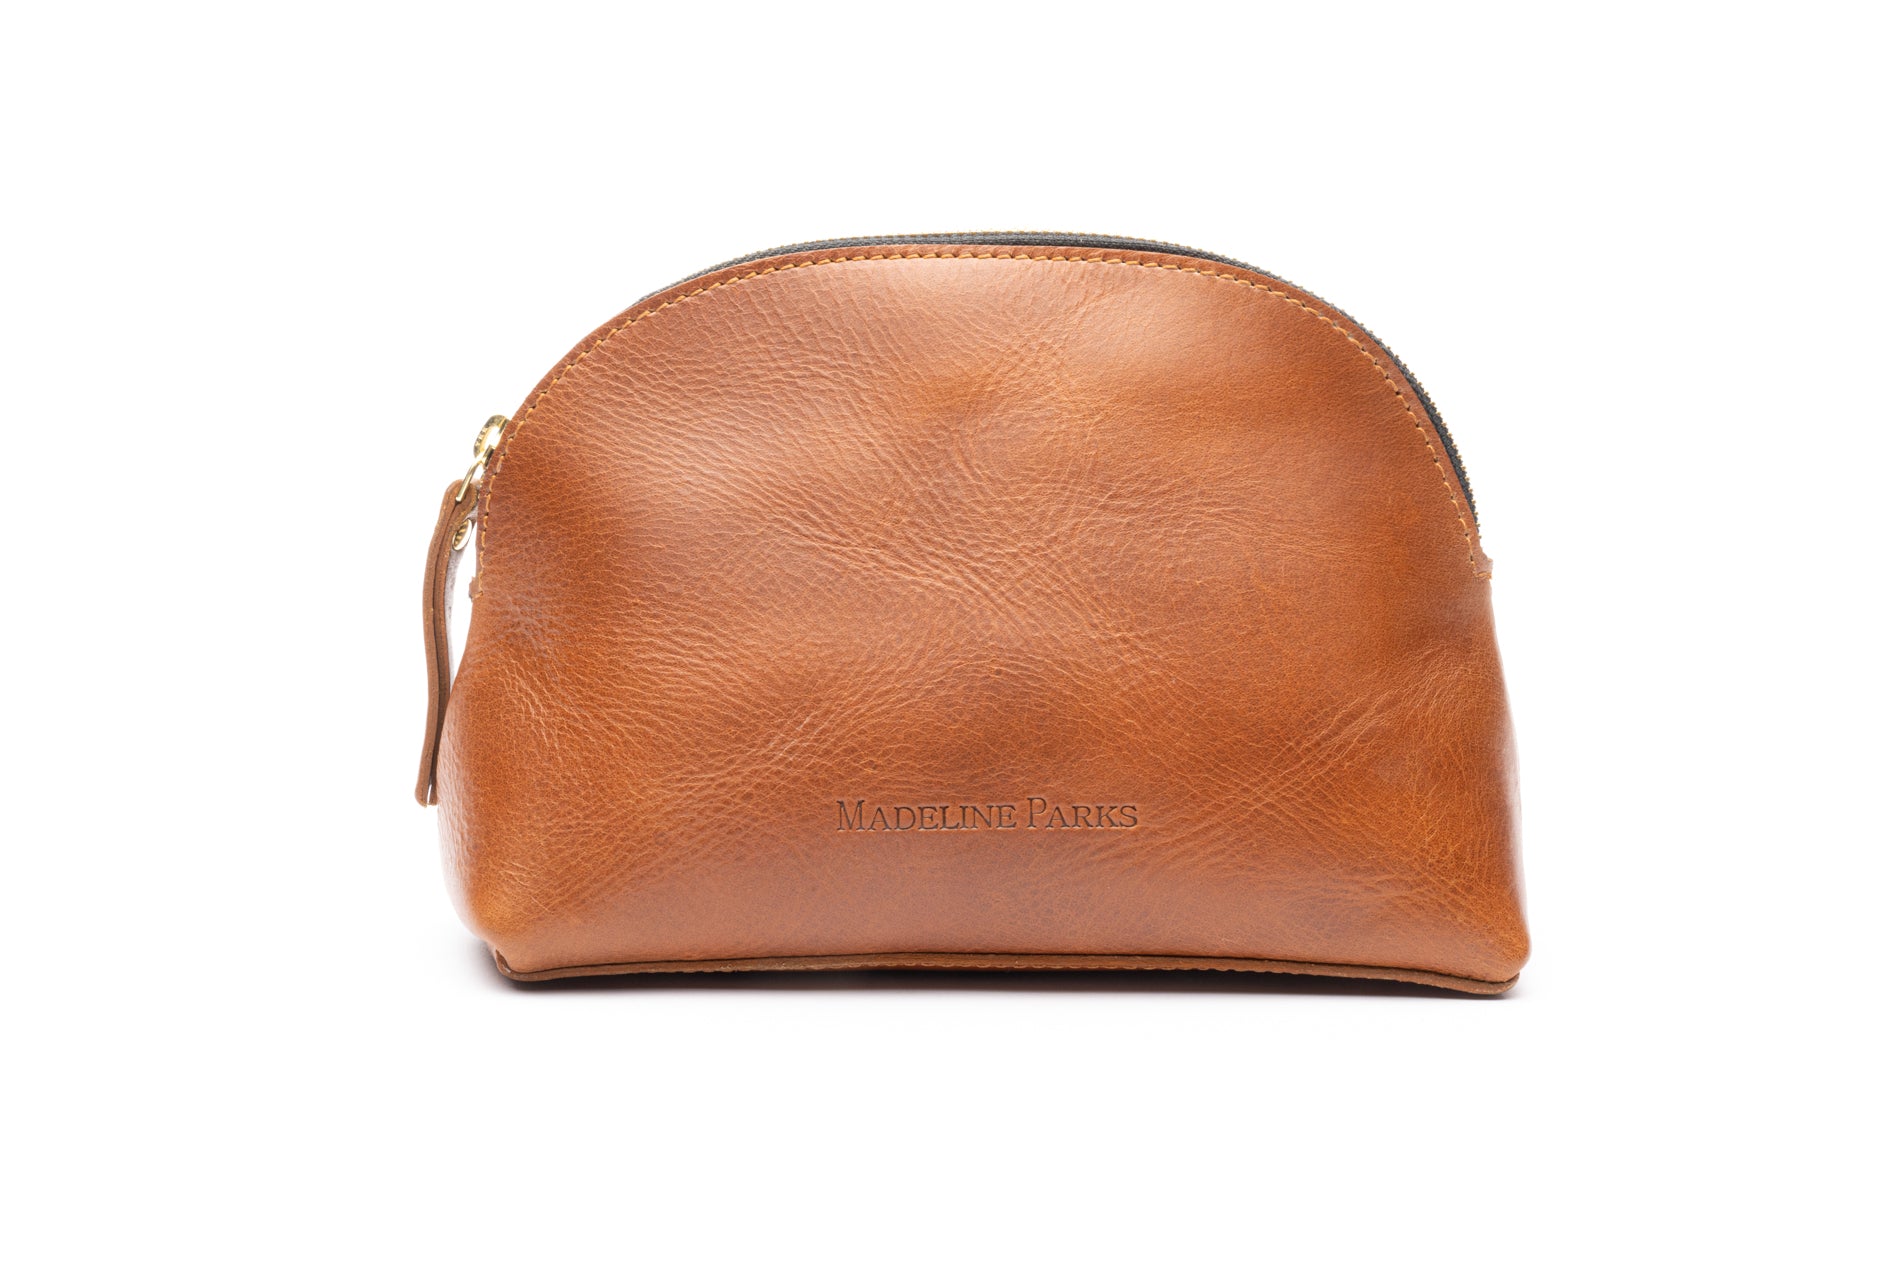 Stylish fashionable brown leather makeup case that is fair trade ethically produced